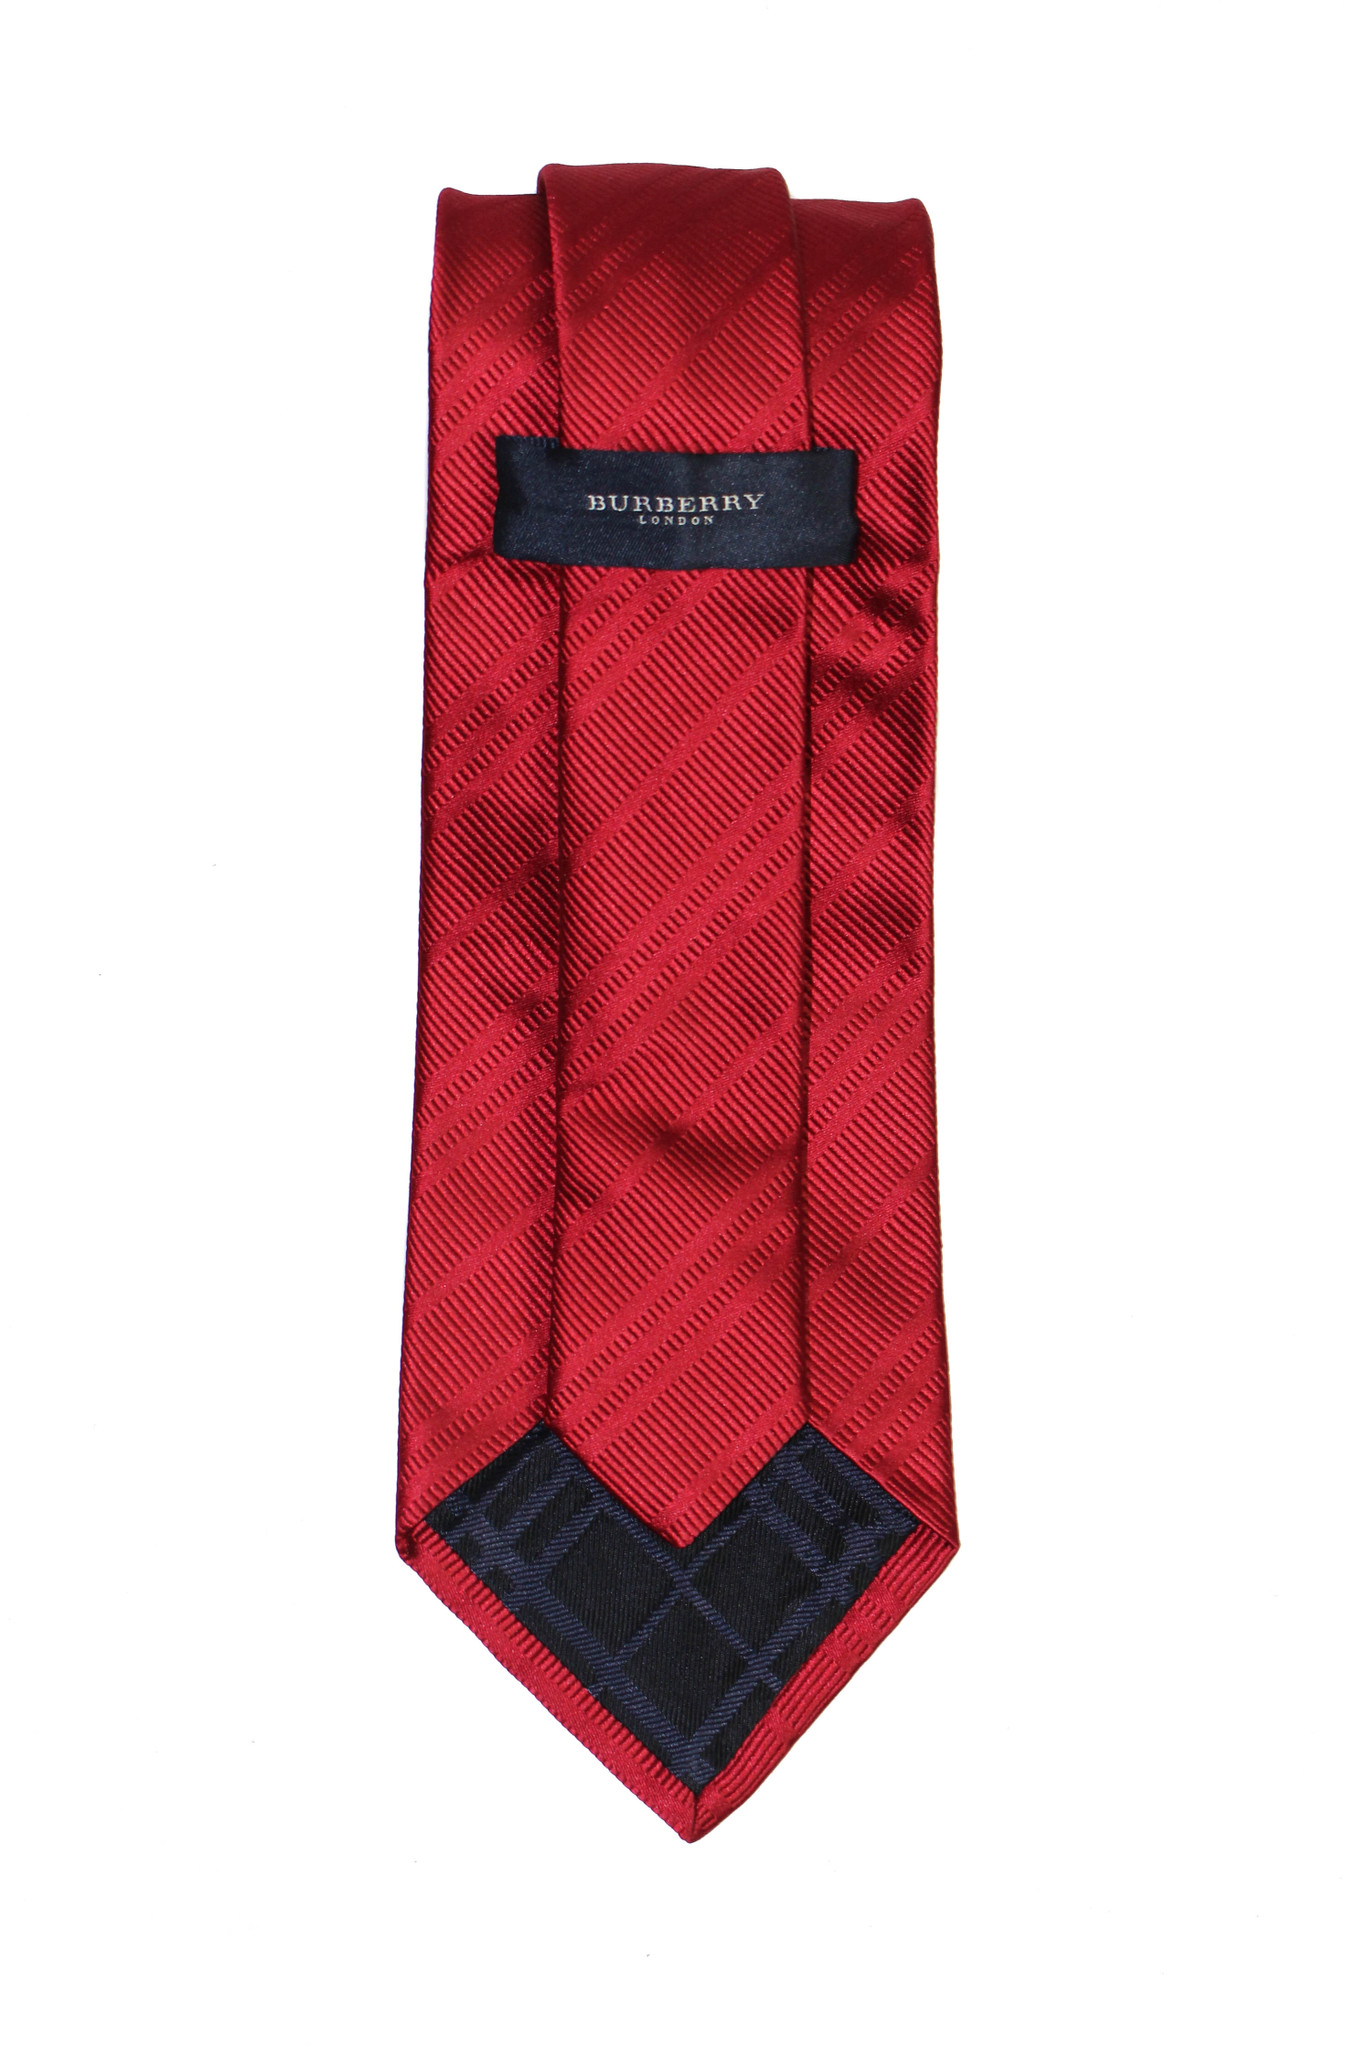 red burberry tie